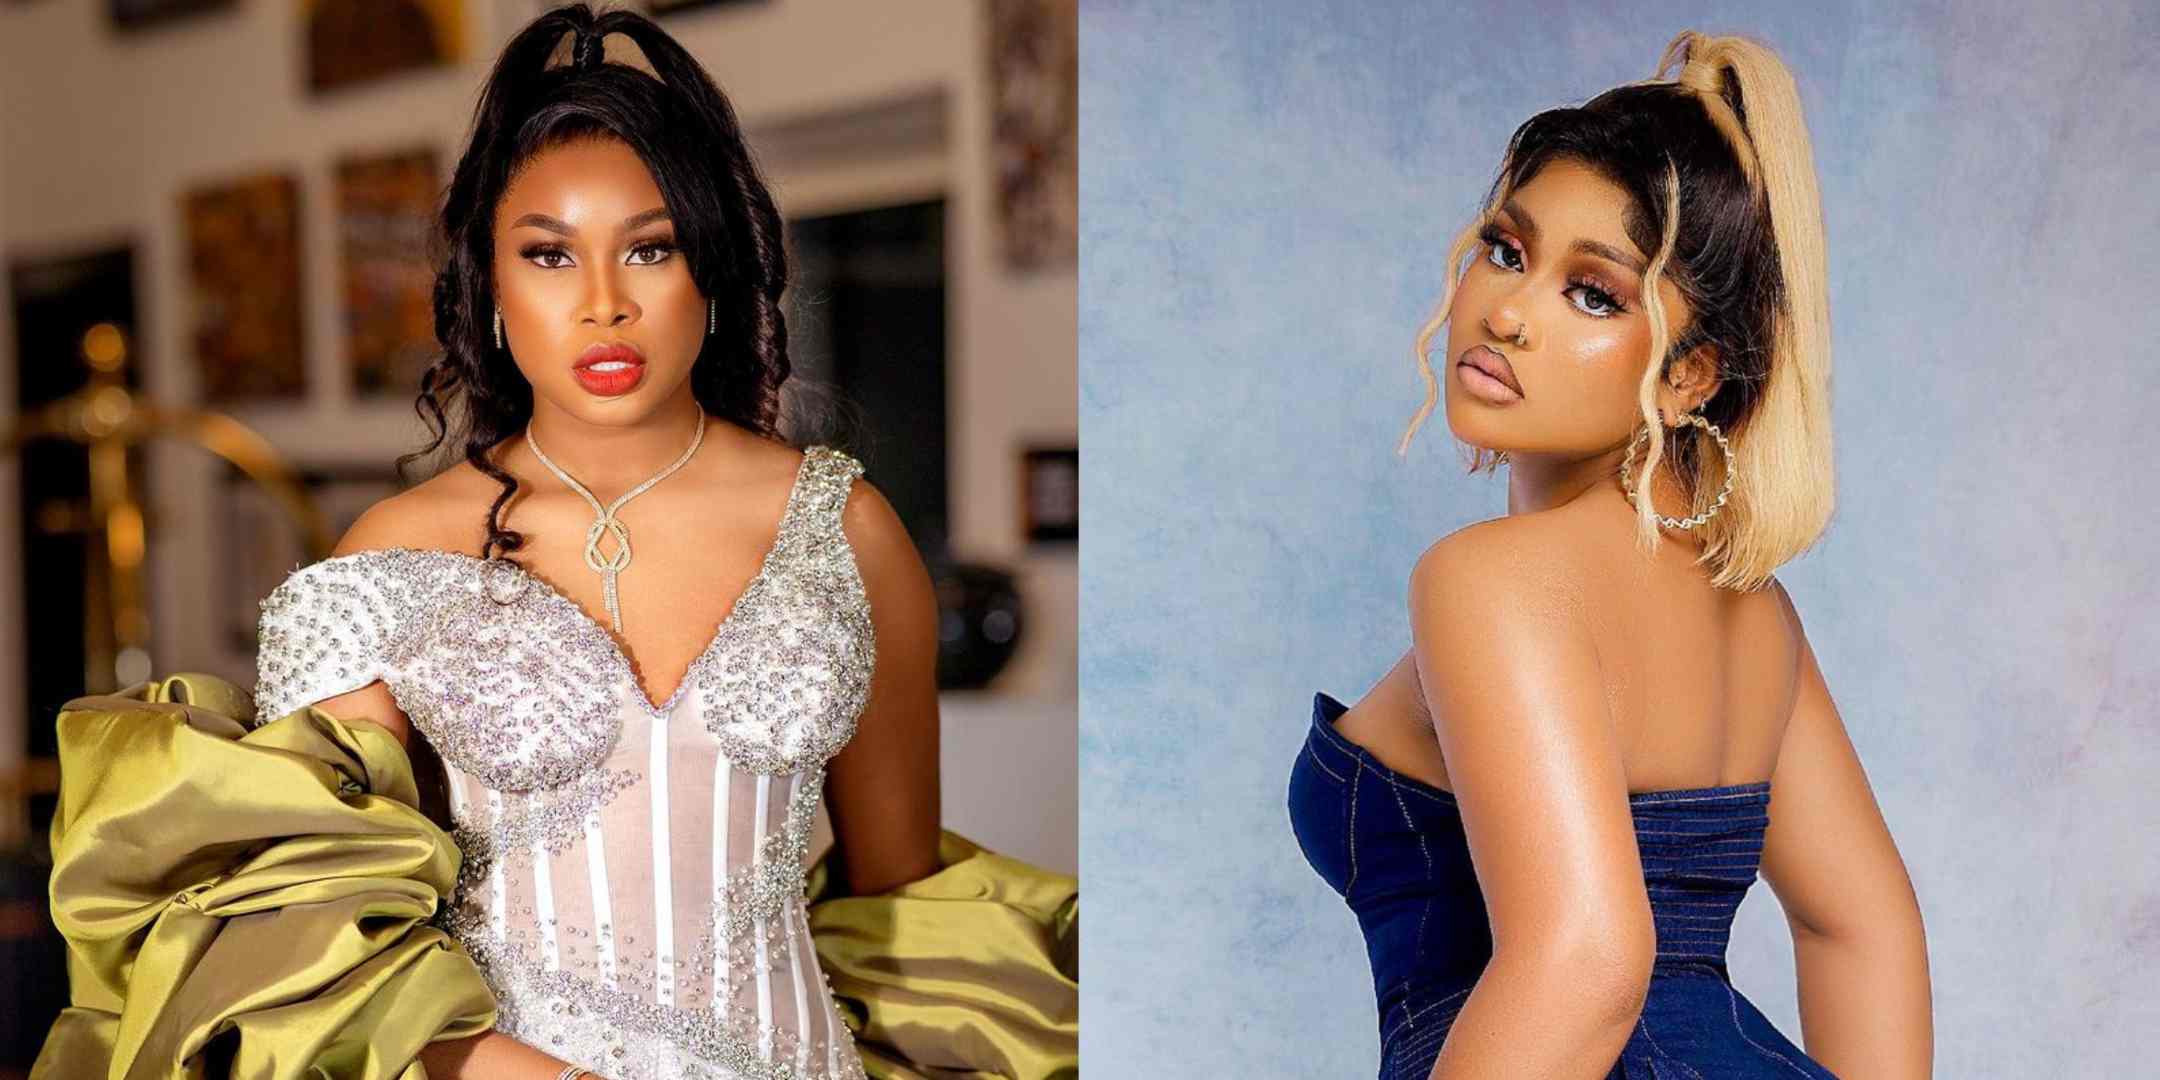 "Biggie called me, but didn't think to call you" – Princess roasts Phyna